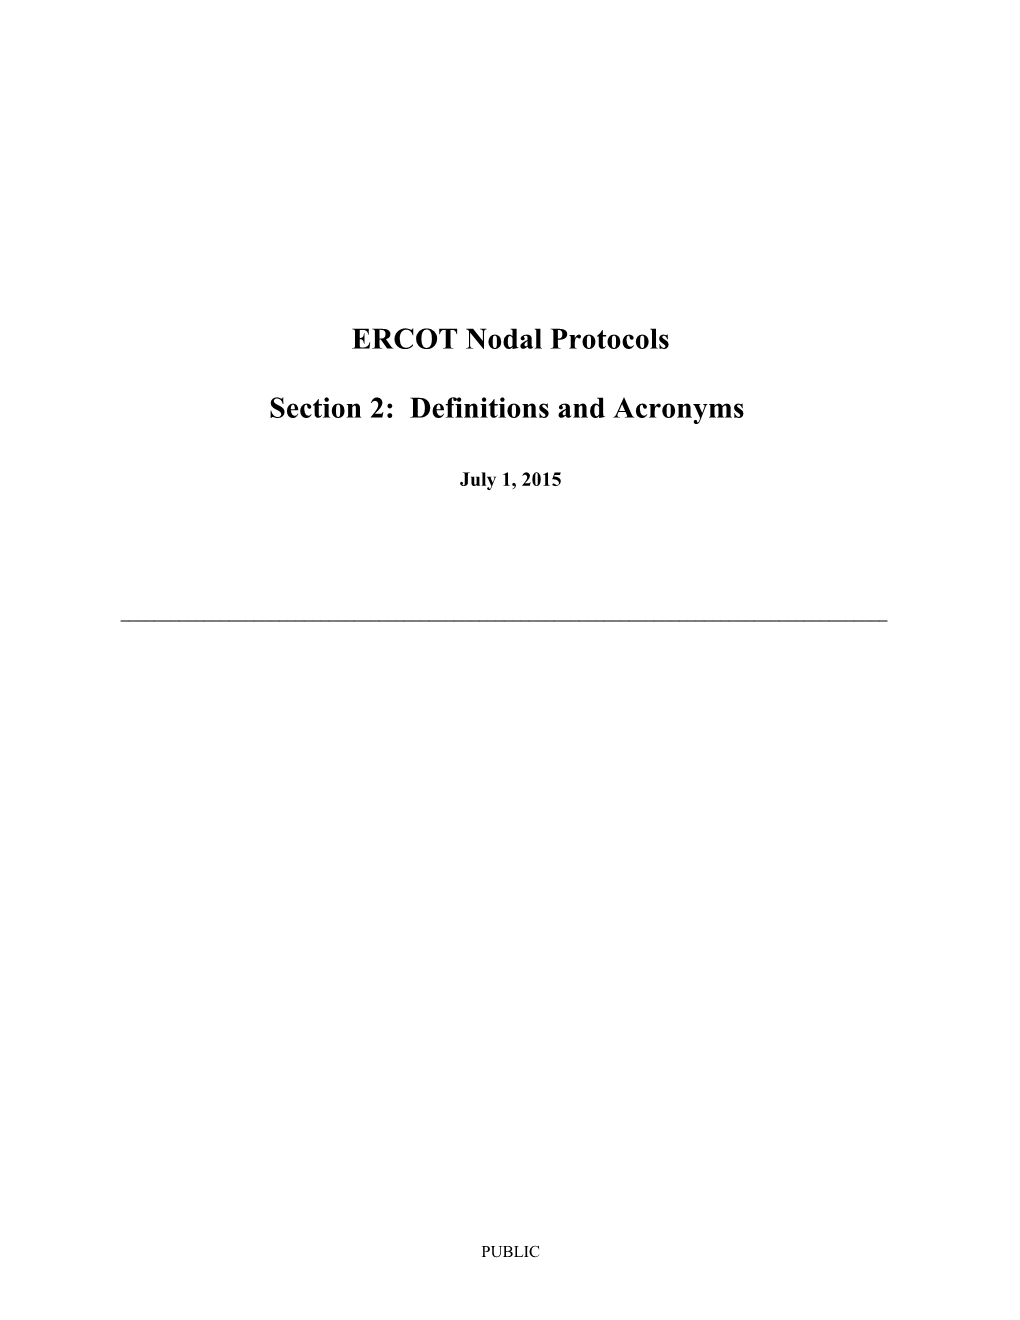 Open Access to the ERCOT Transmission Grid s1